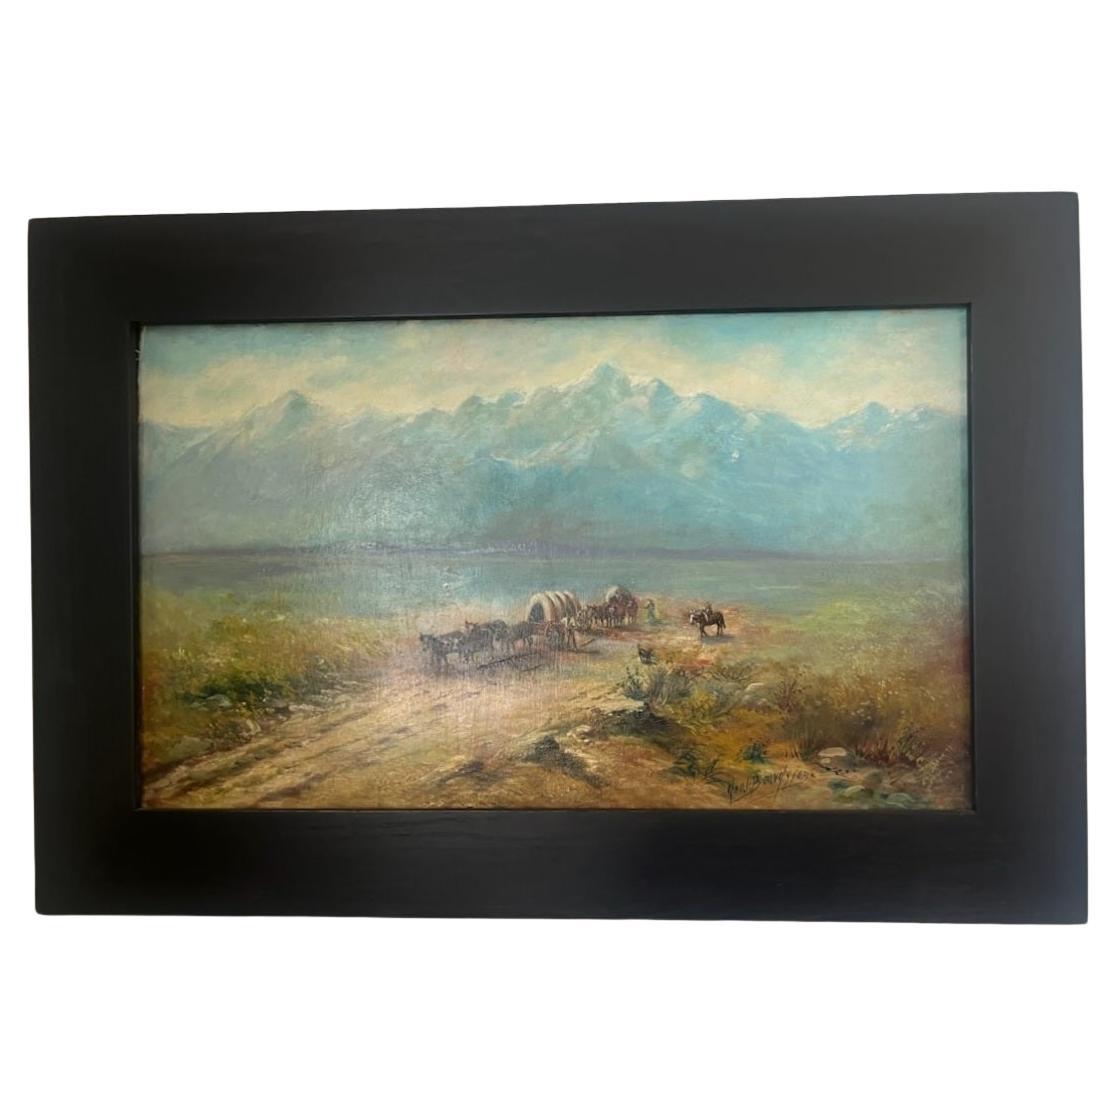 19thc Oil Painting on Board of Wagons on the Dusty Trail